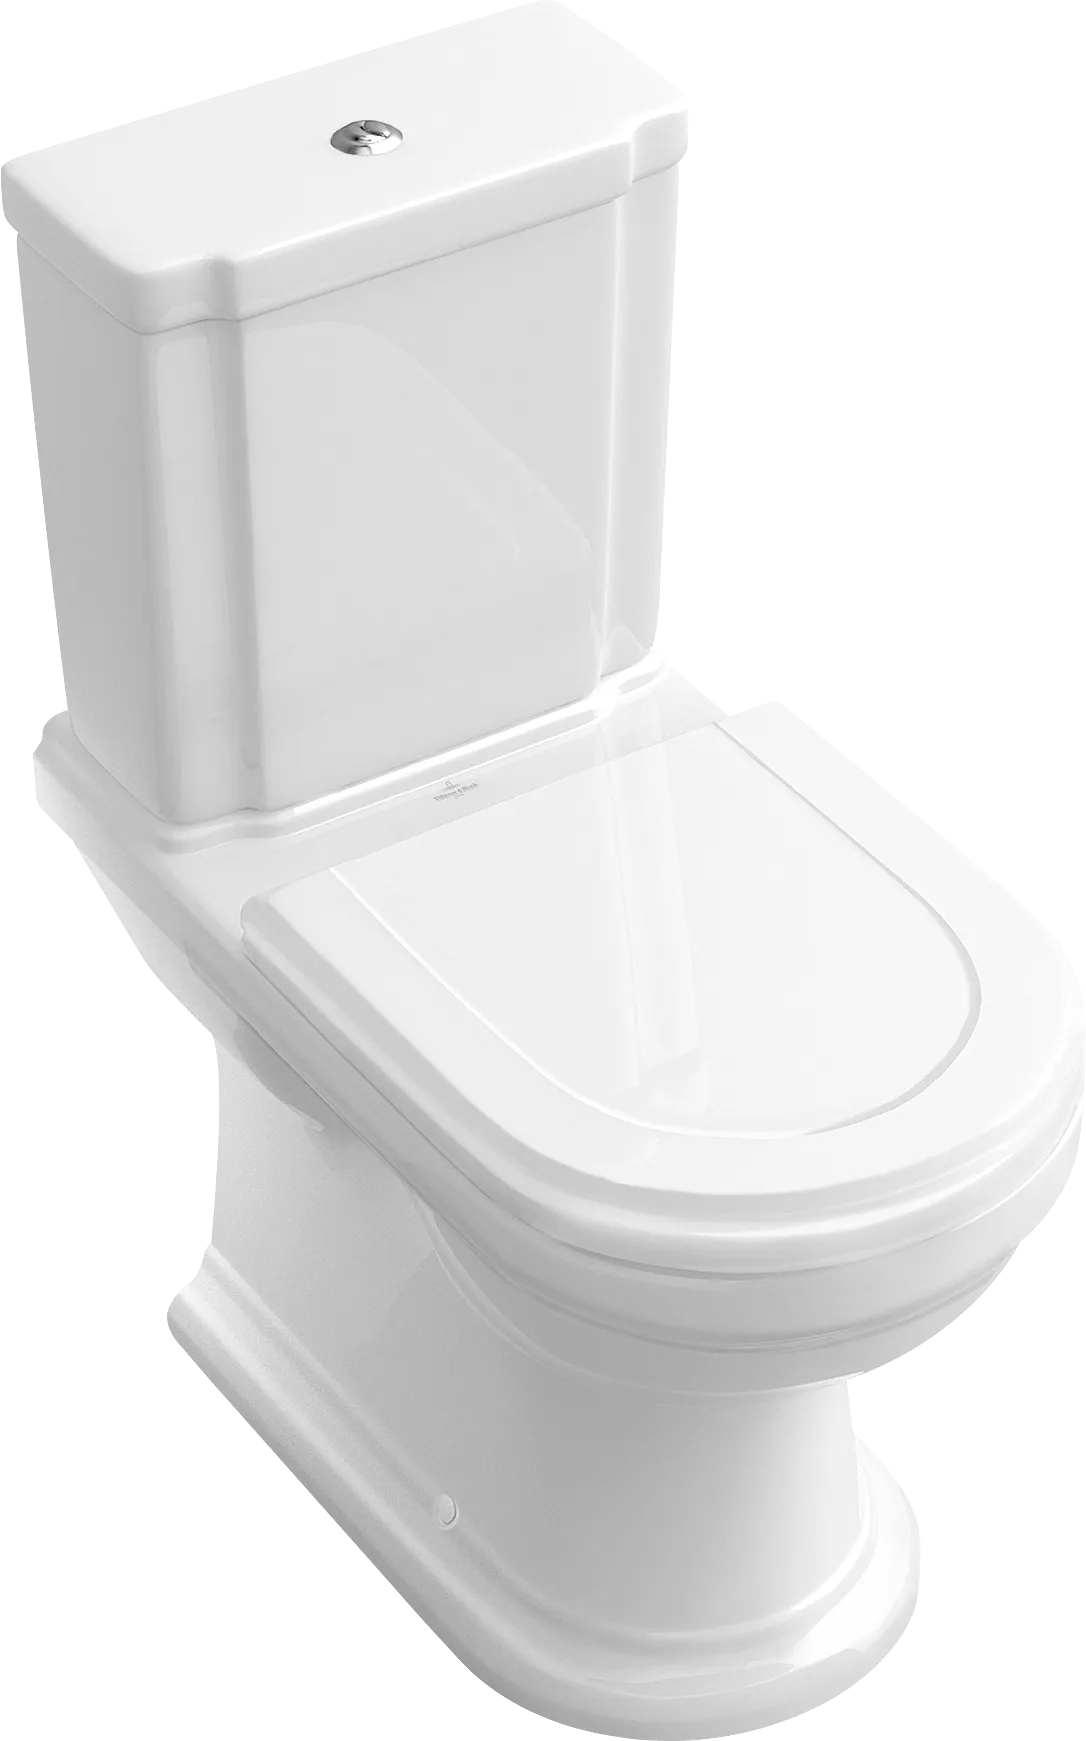 Picture of VILLEROY BOCH Hommage Washdown toilet for close-coupled WC-suite, floor-standing, White Alpin CeramicPlus #666210R1